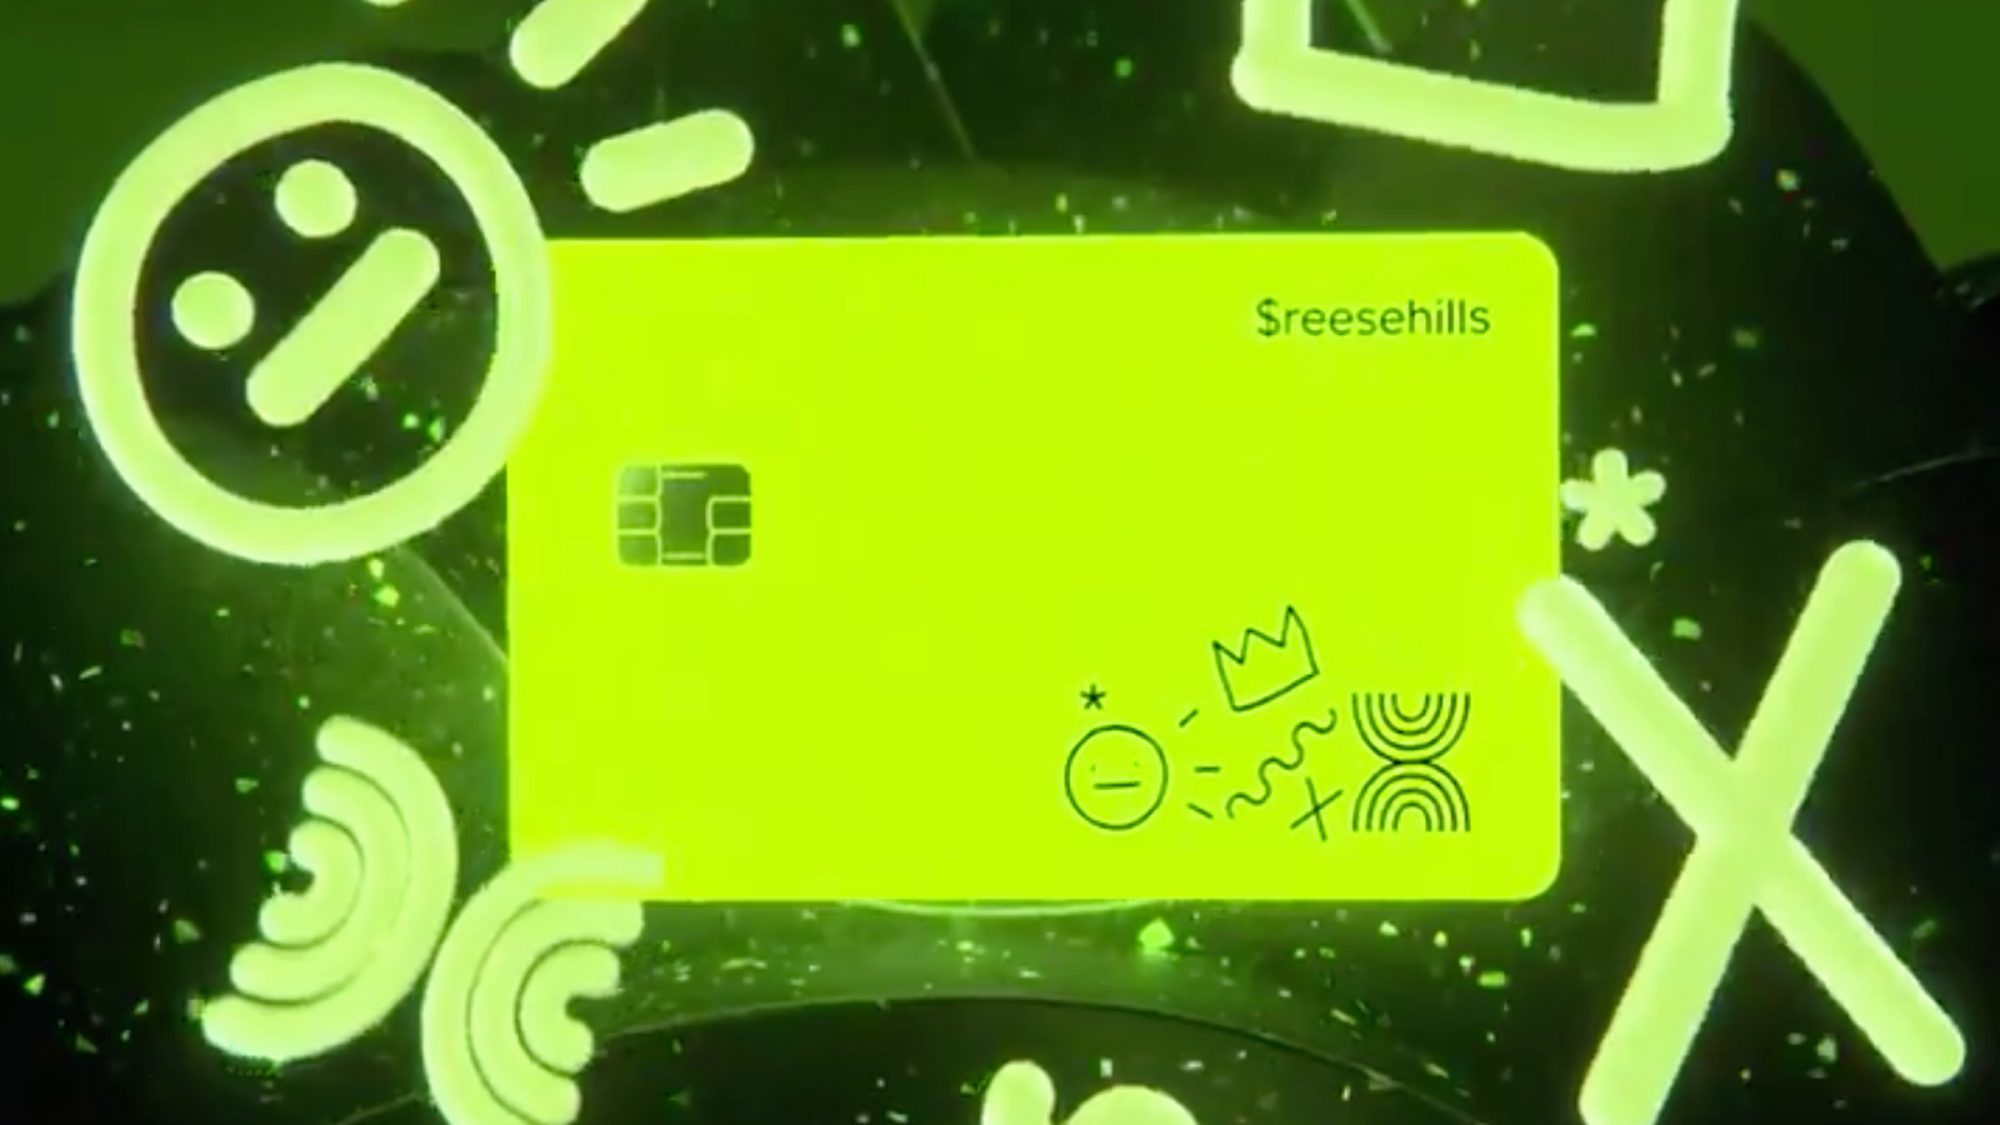 How to Get Your Own Cash App Glow in the Dark Card